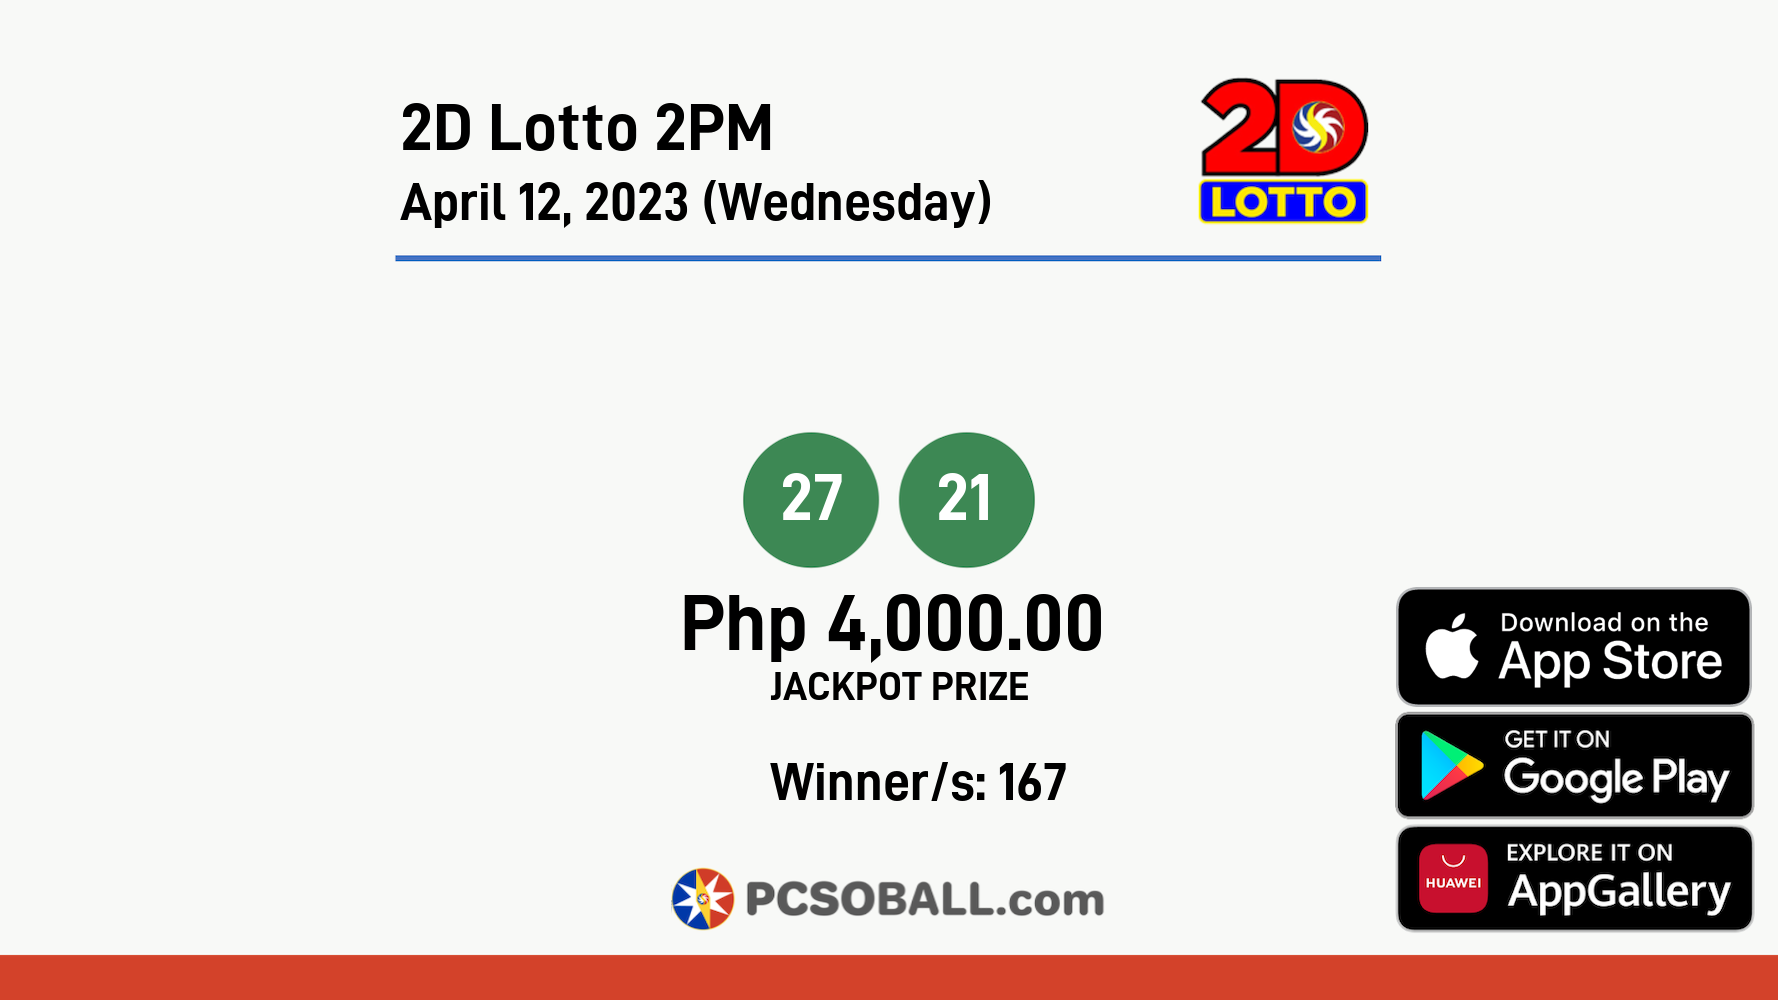 2D Lotto 2PM April 12, 2023 (Wednesday) Result